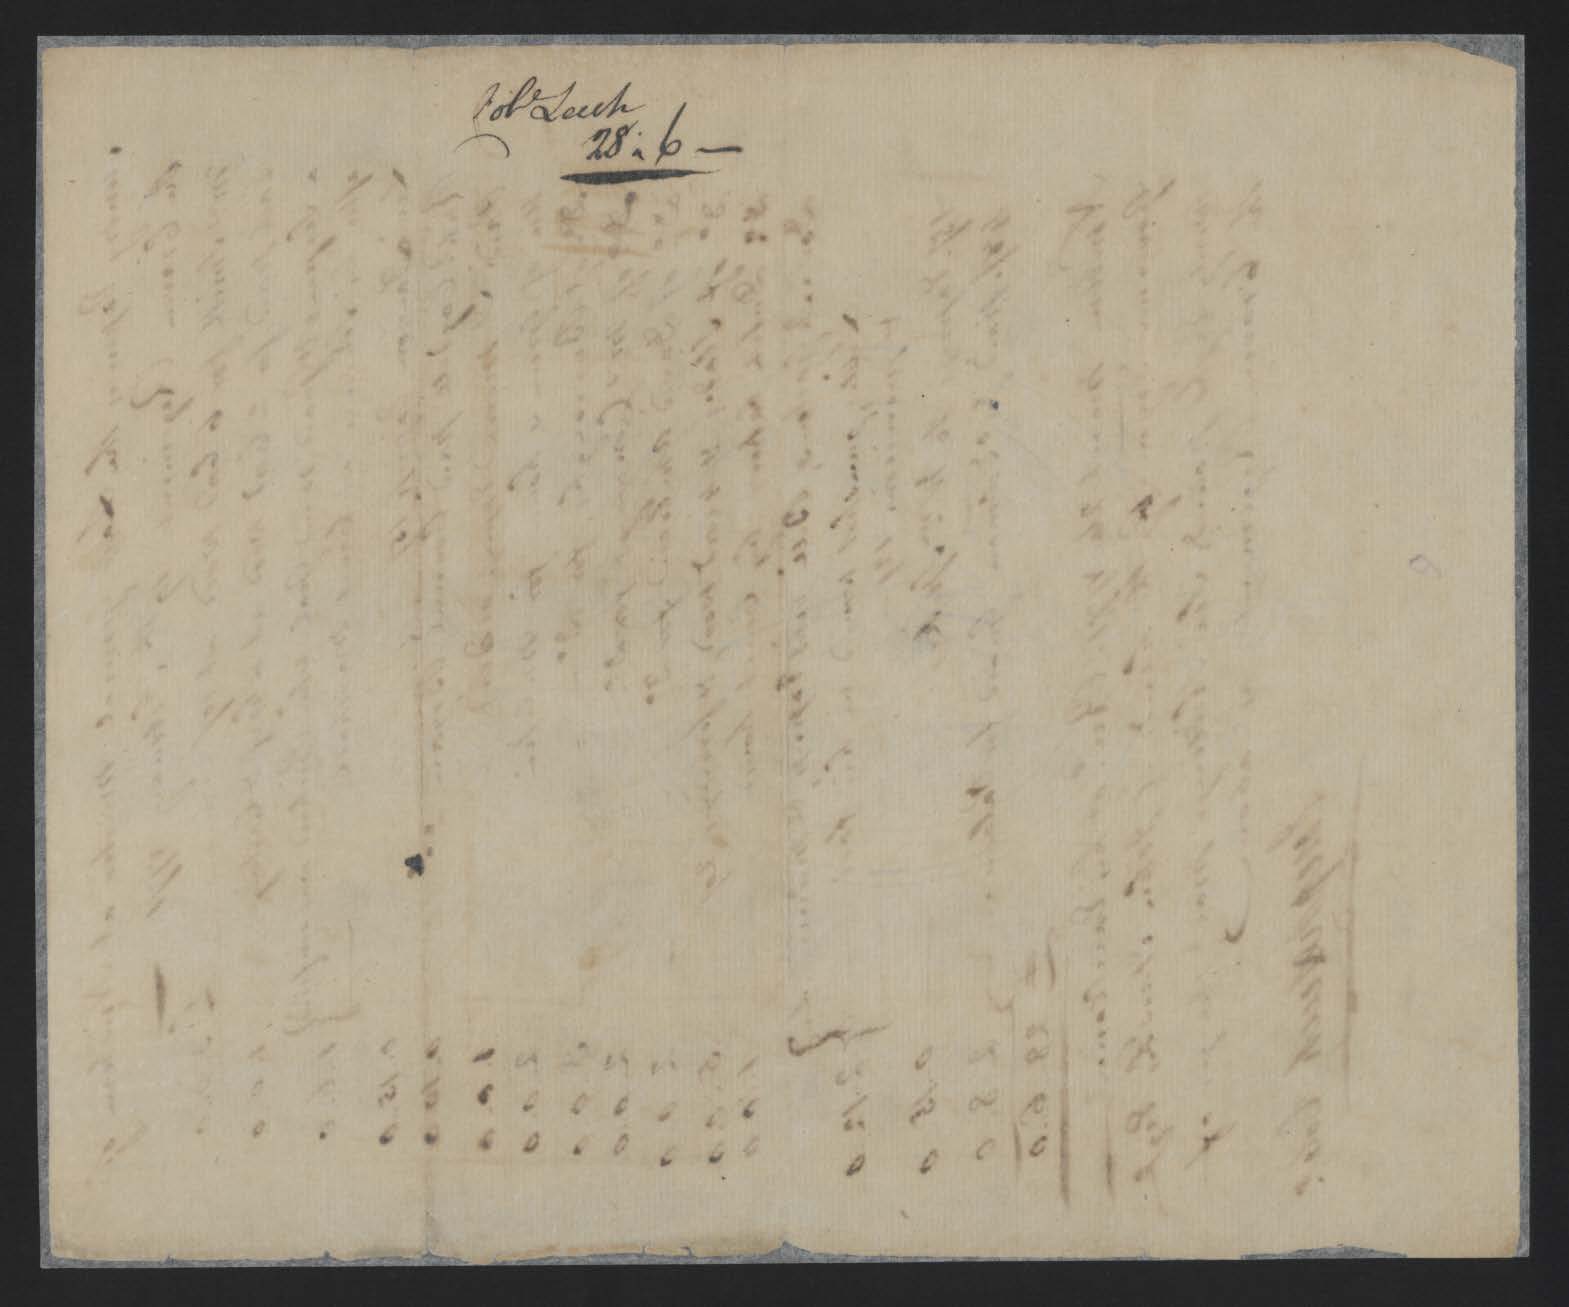 Payments from Joseph Leech on Behalf of the Craven Regiment, 19 February 1771, page 2.